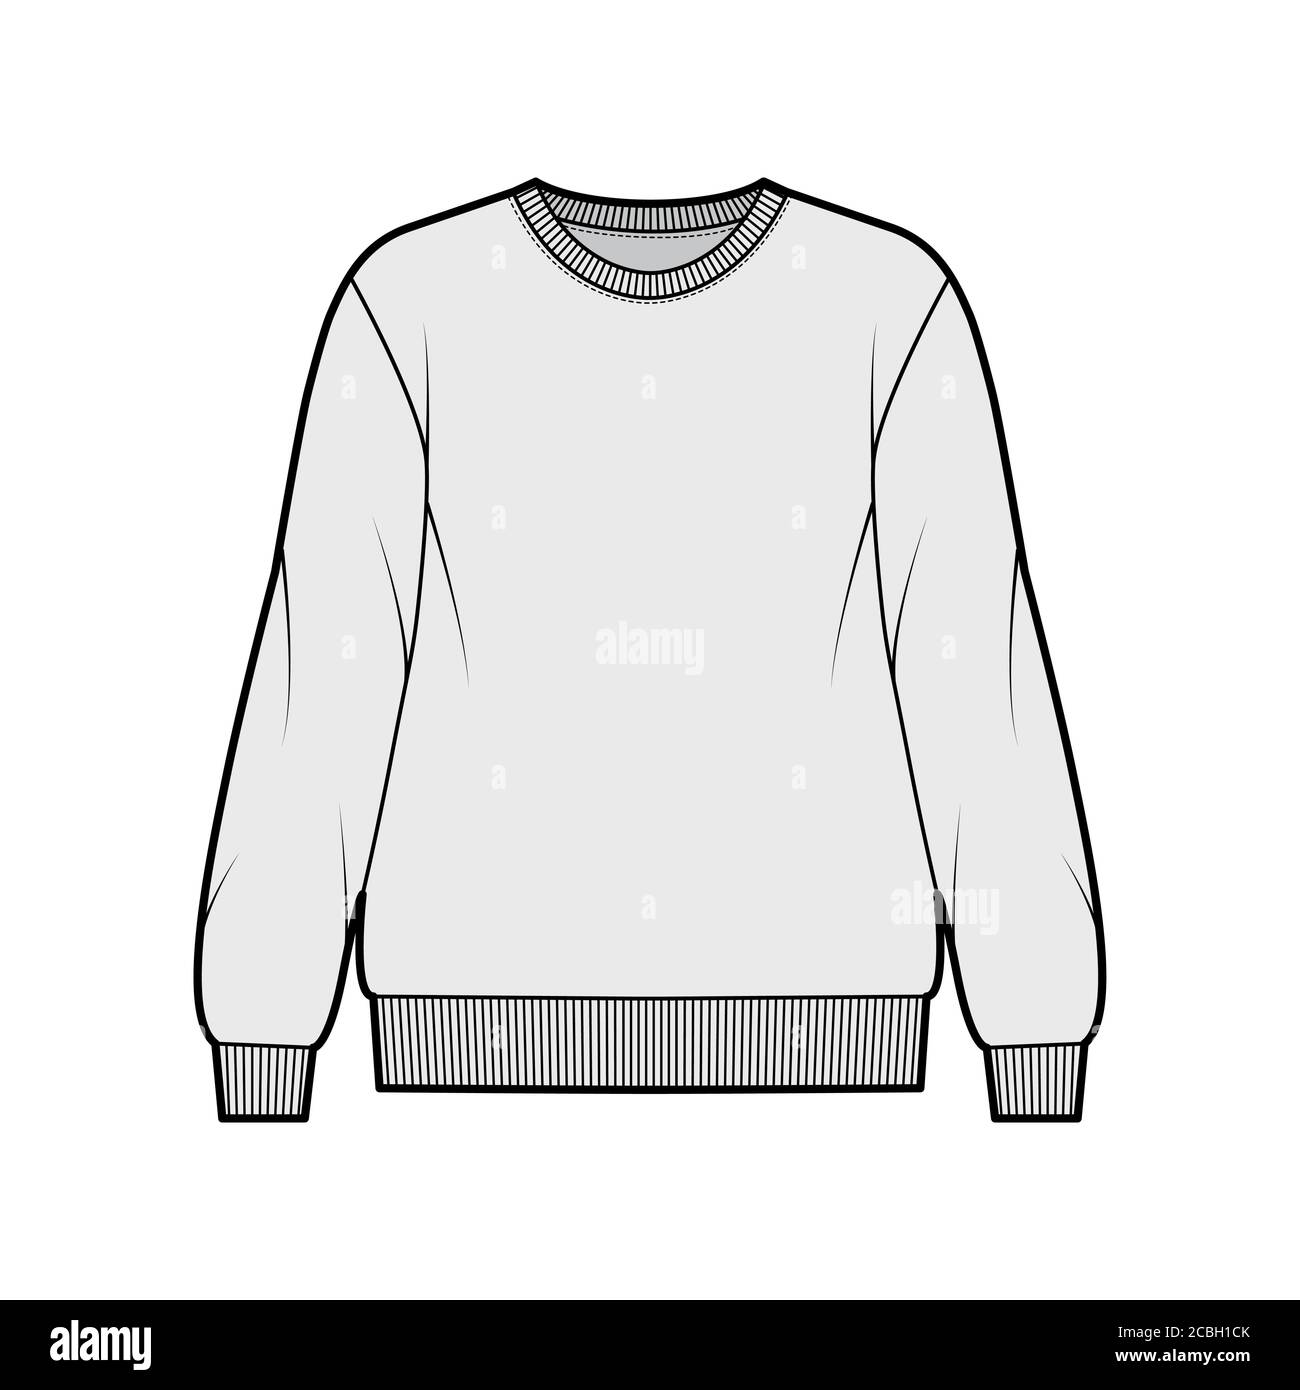 Cotton-terry oversized sweatshirt technical fashion illustration with relaxed fit, crew neckline, long sleeves. Flat outwear jumper apparel template front, grey color. Women, men, unisex top CAD Stock Vector